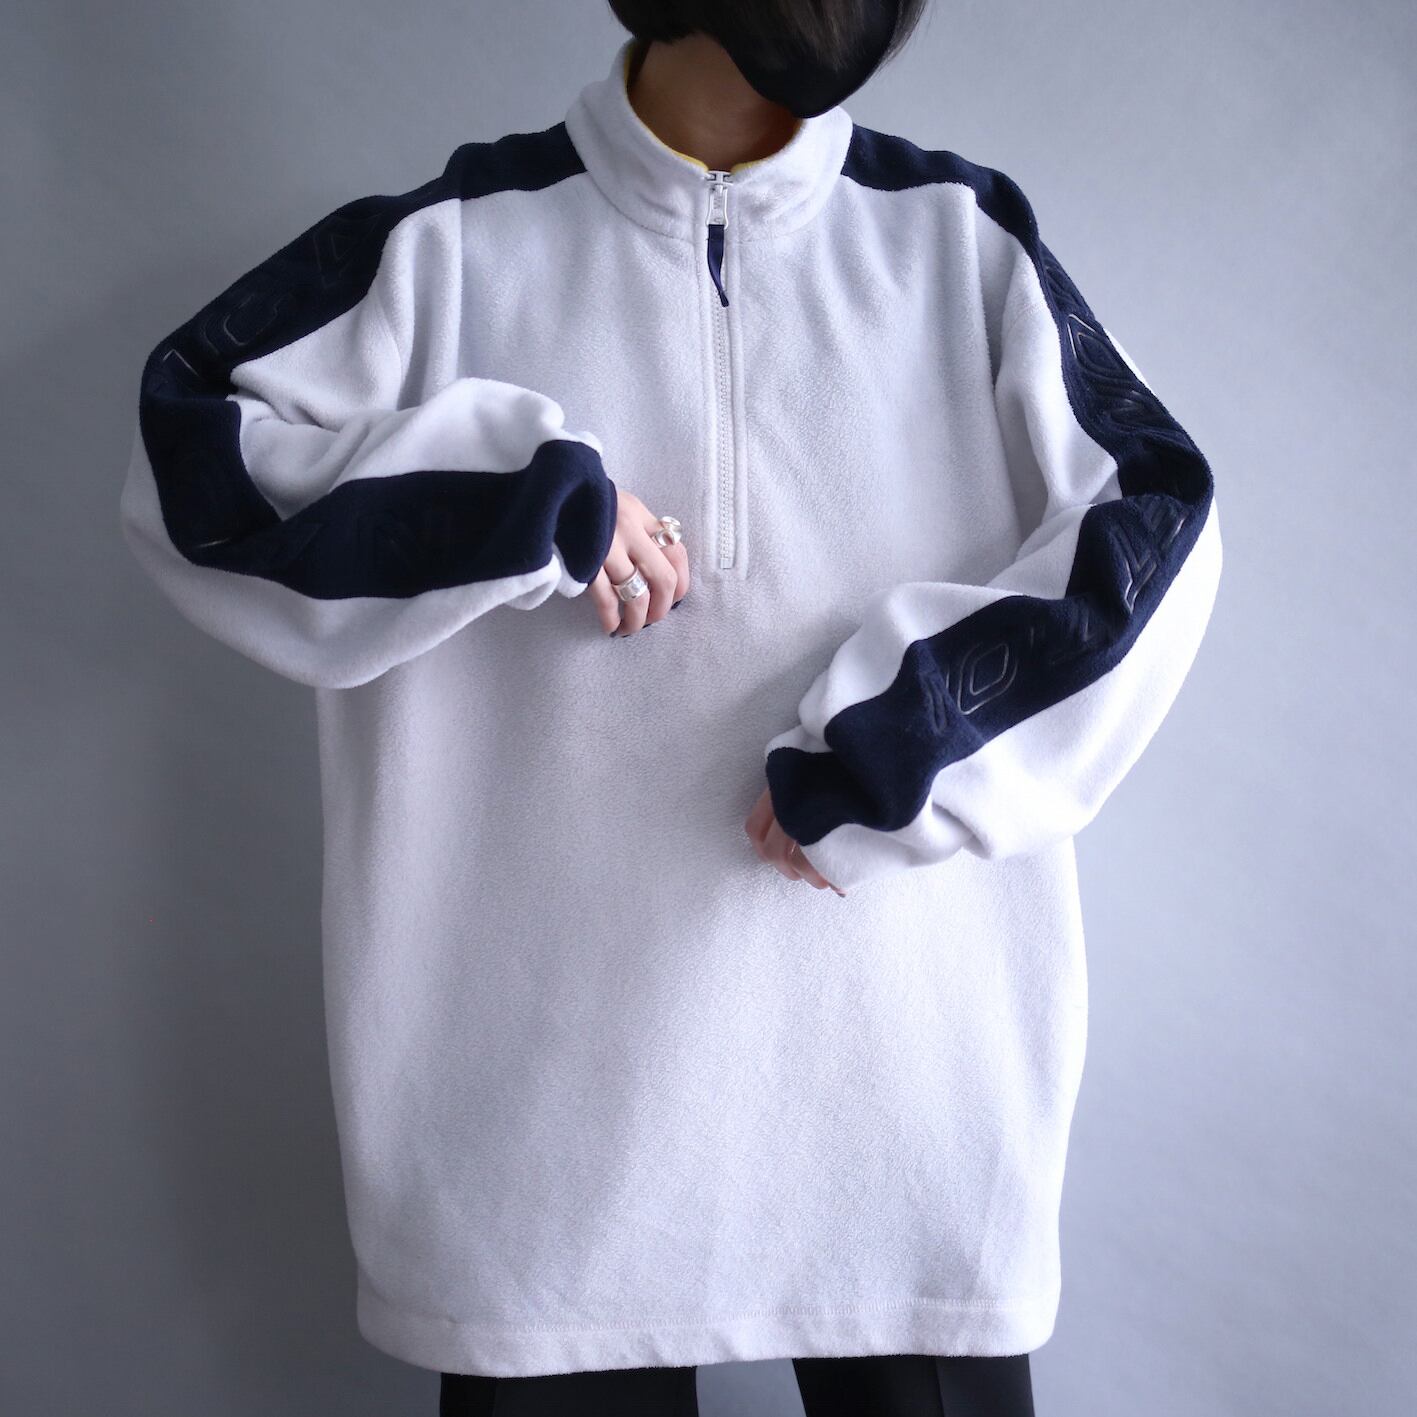 "NAUTICA" switching and sleeve letter design over silhouette fleece pullover